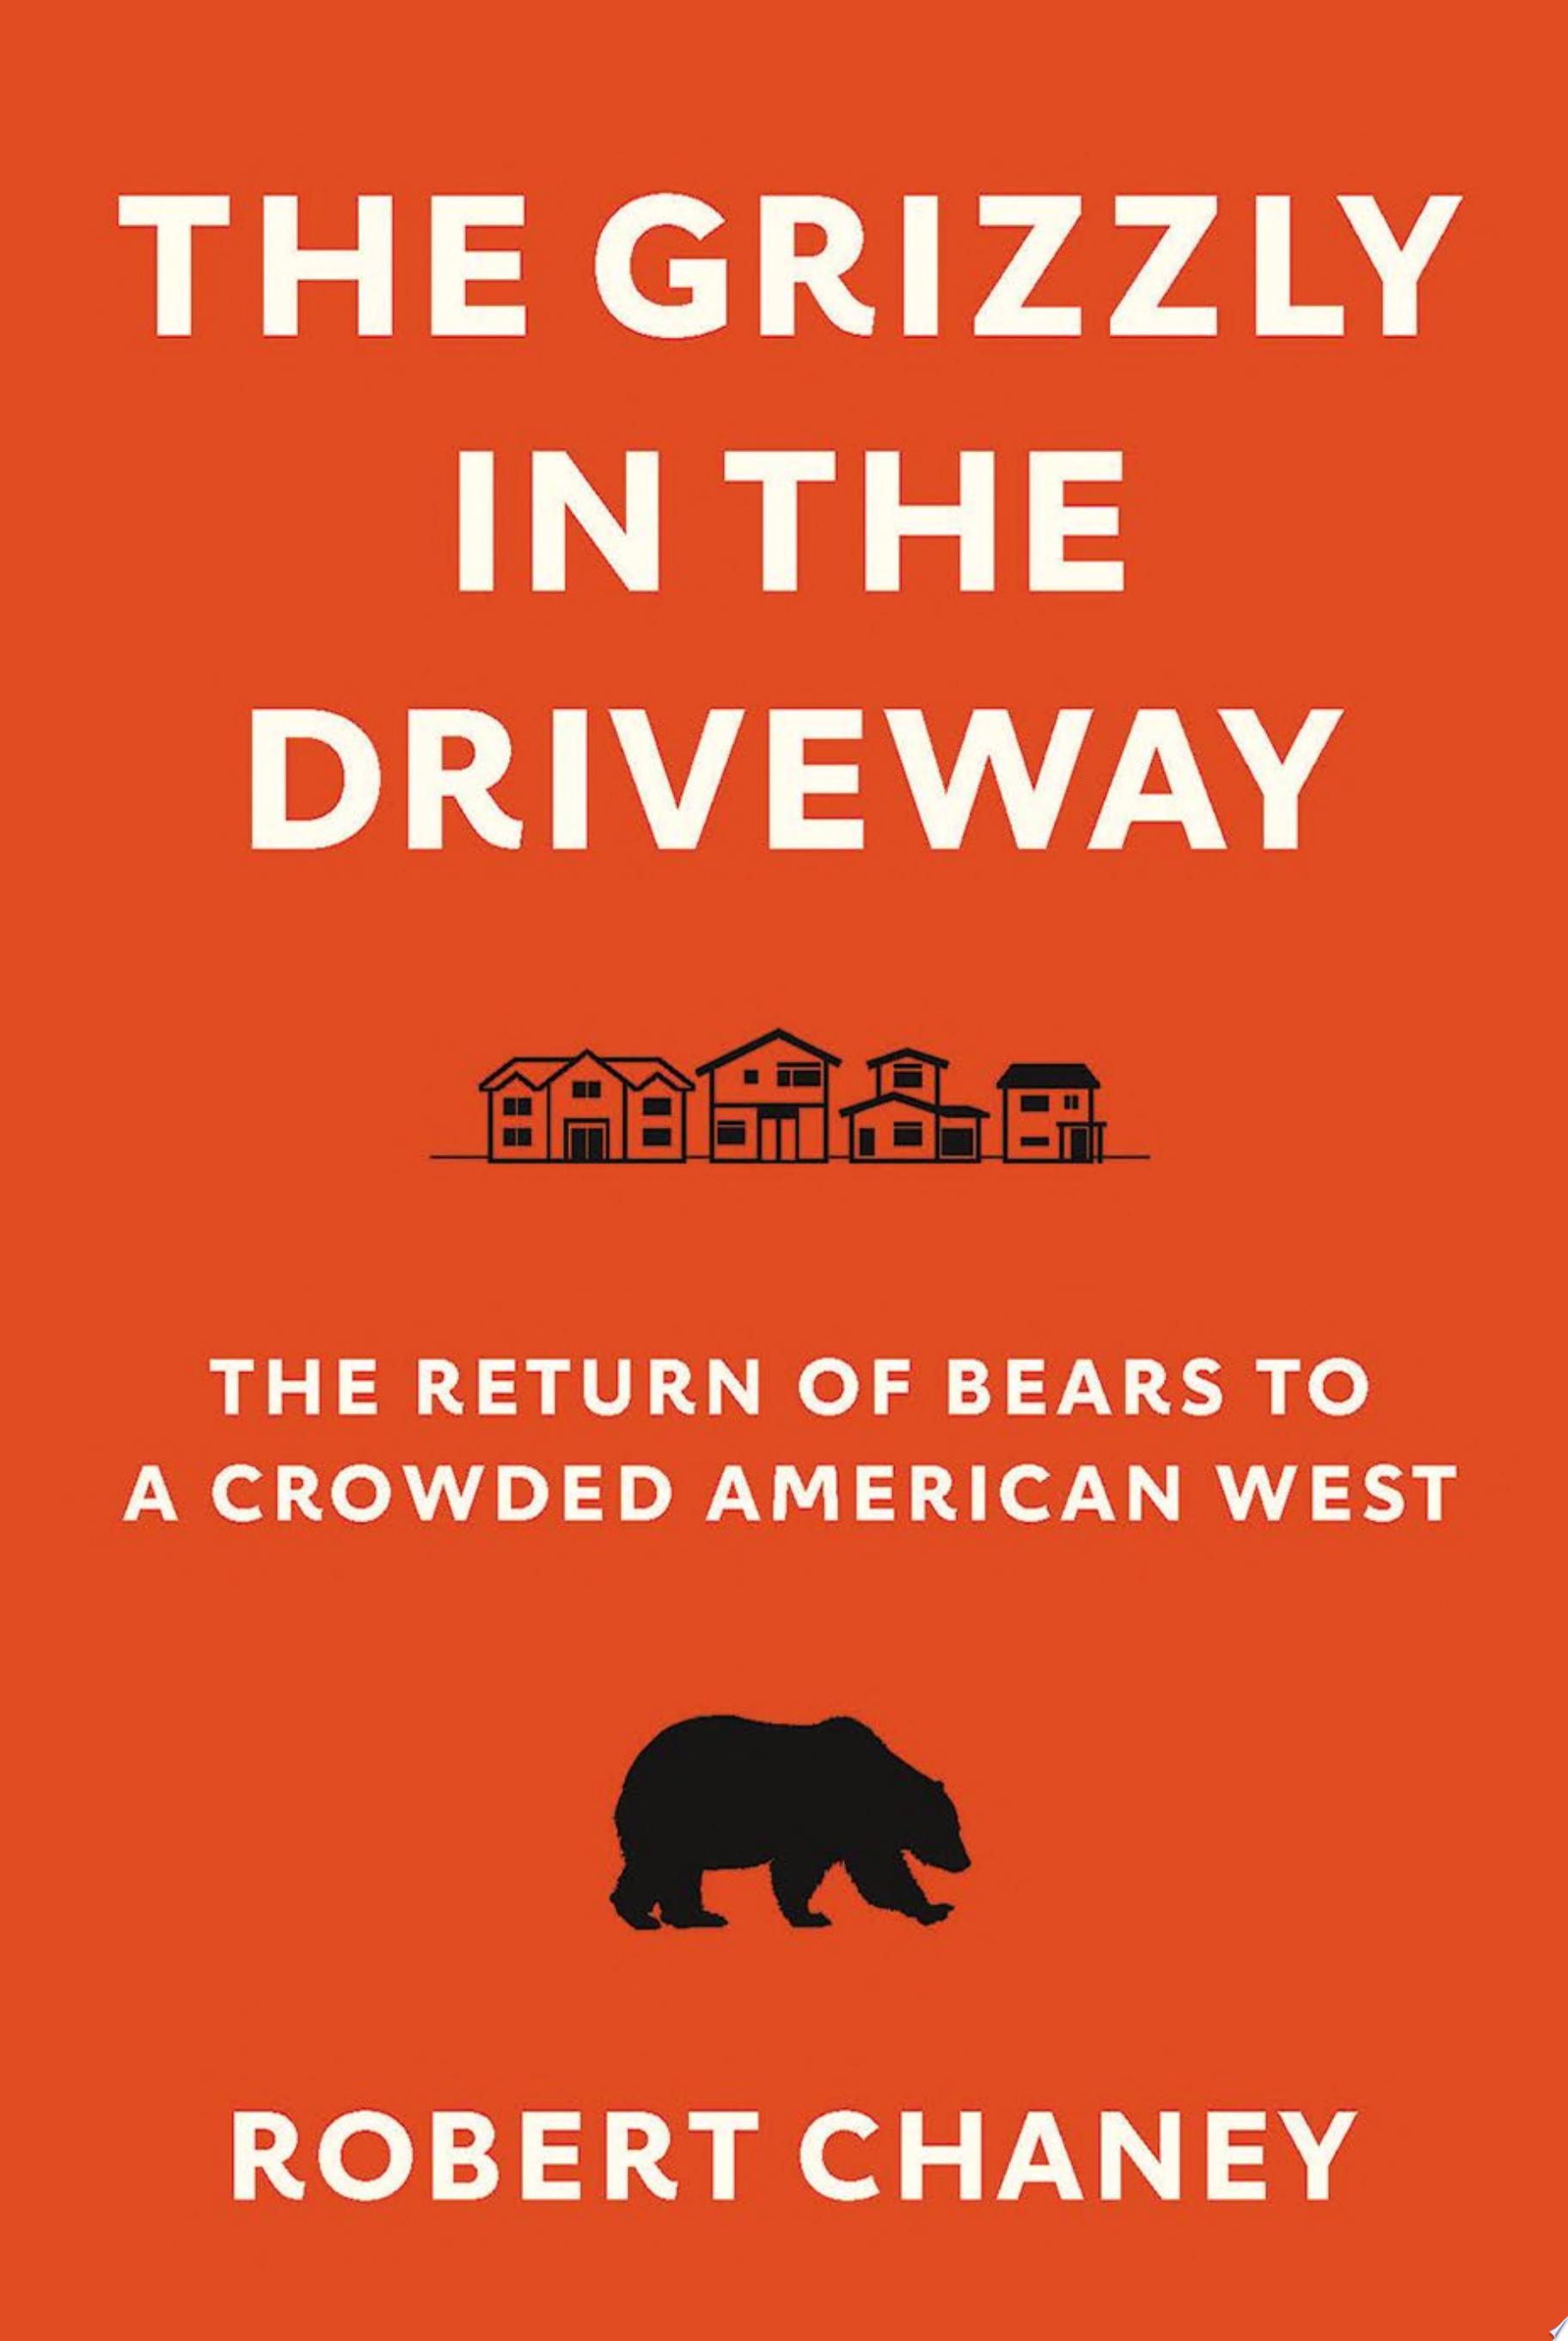 Image for "The Grizzly in the Driveway"